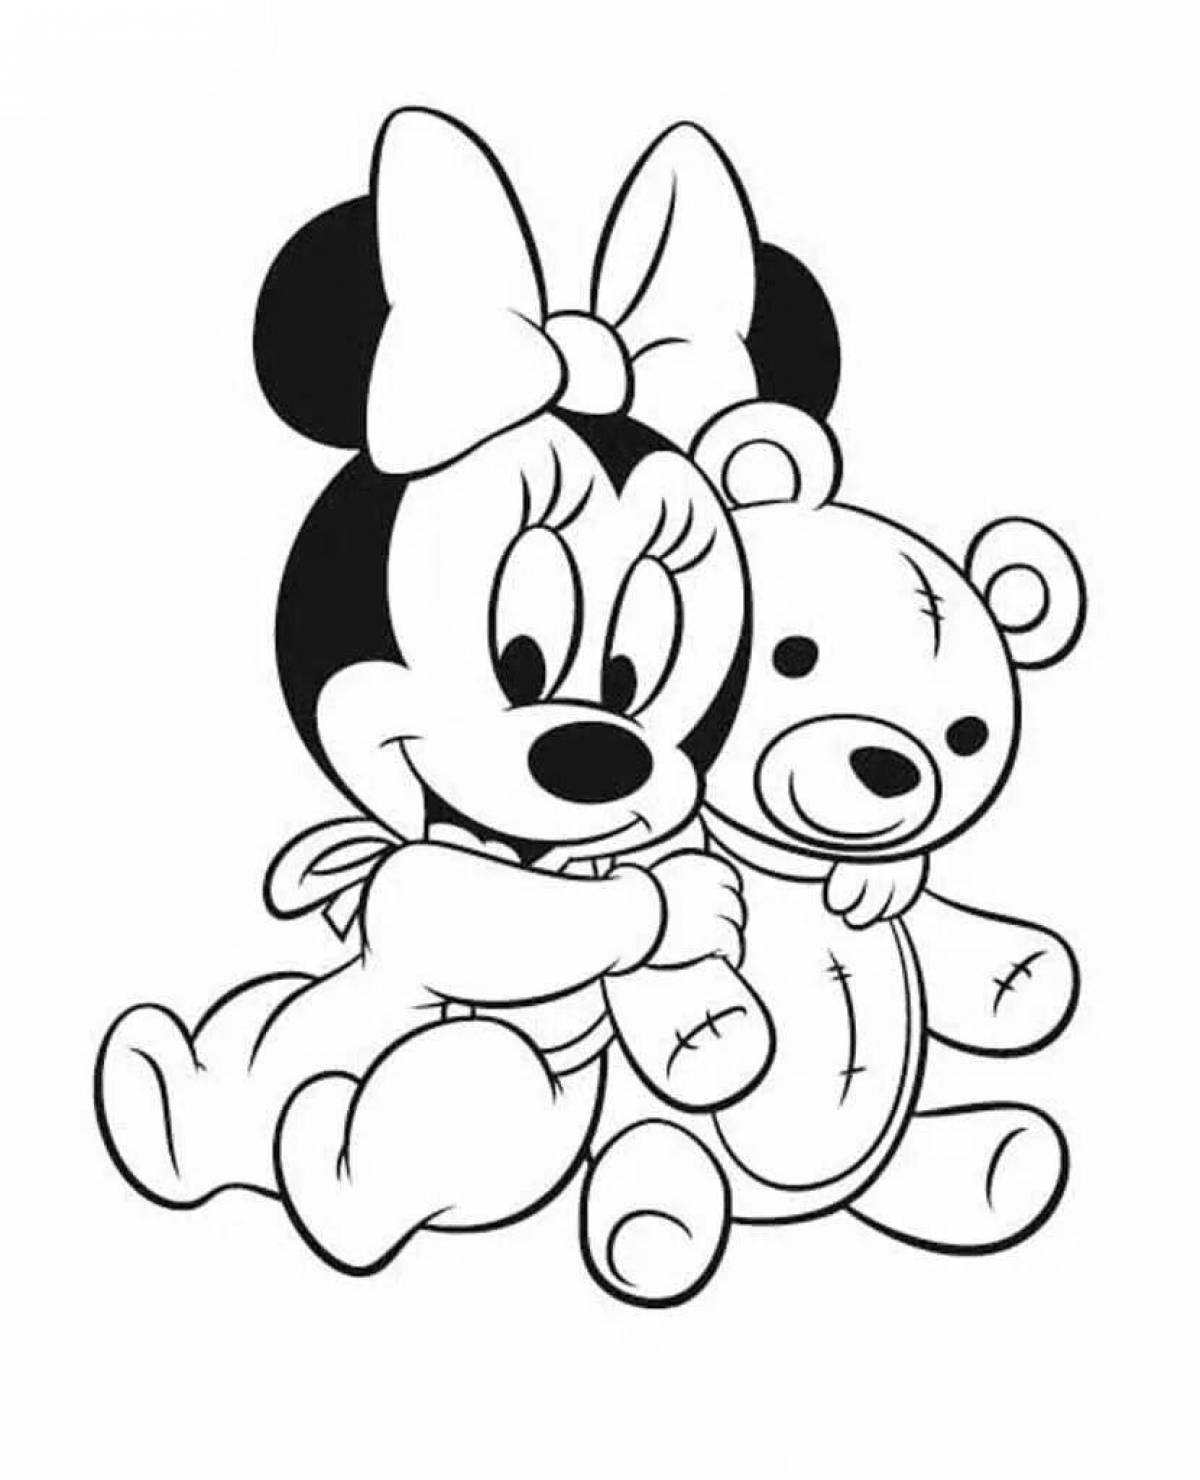 Adorable mickey mouse coloring book for kids